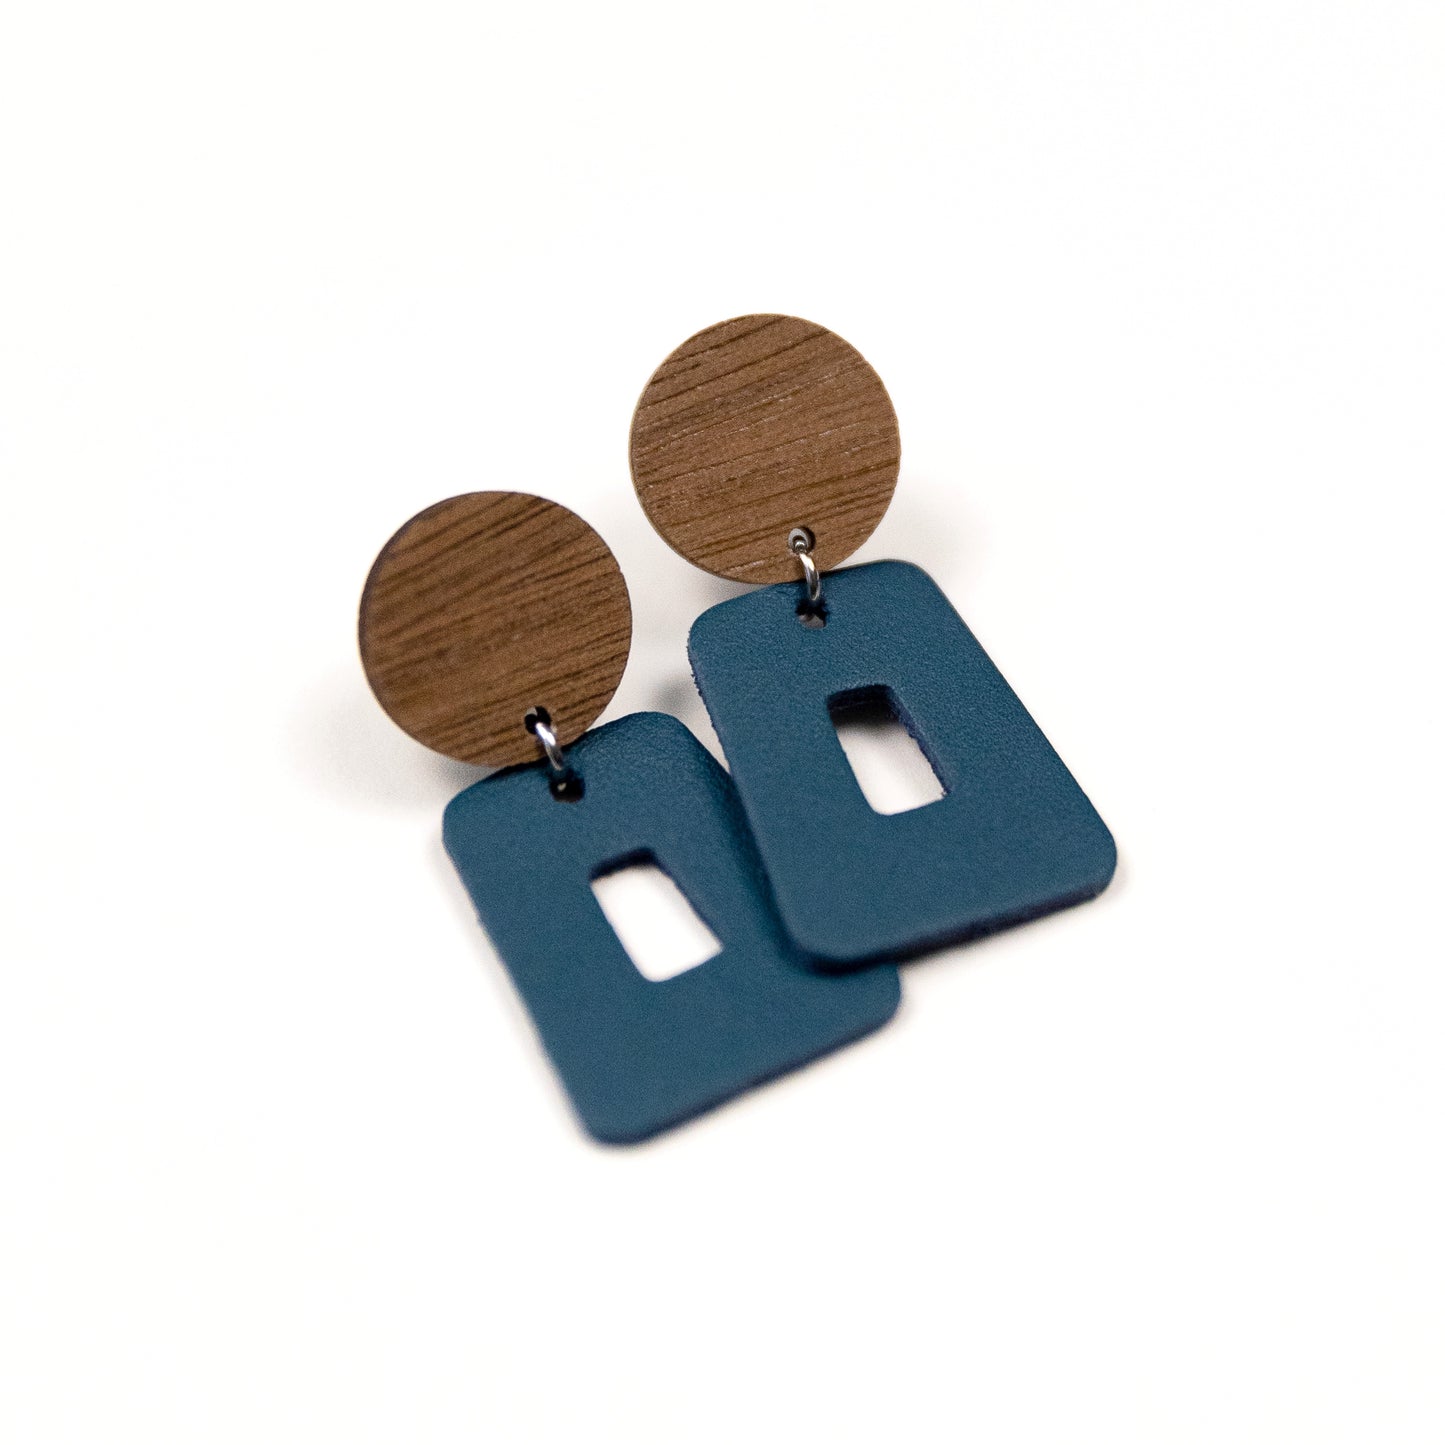 THE SUE in Turquoise/ Leather + Wood Statement Earrings